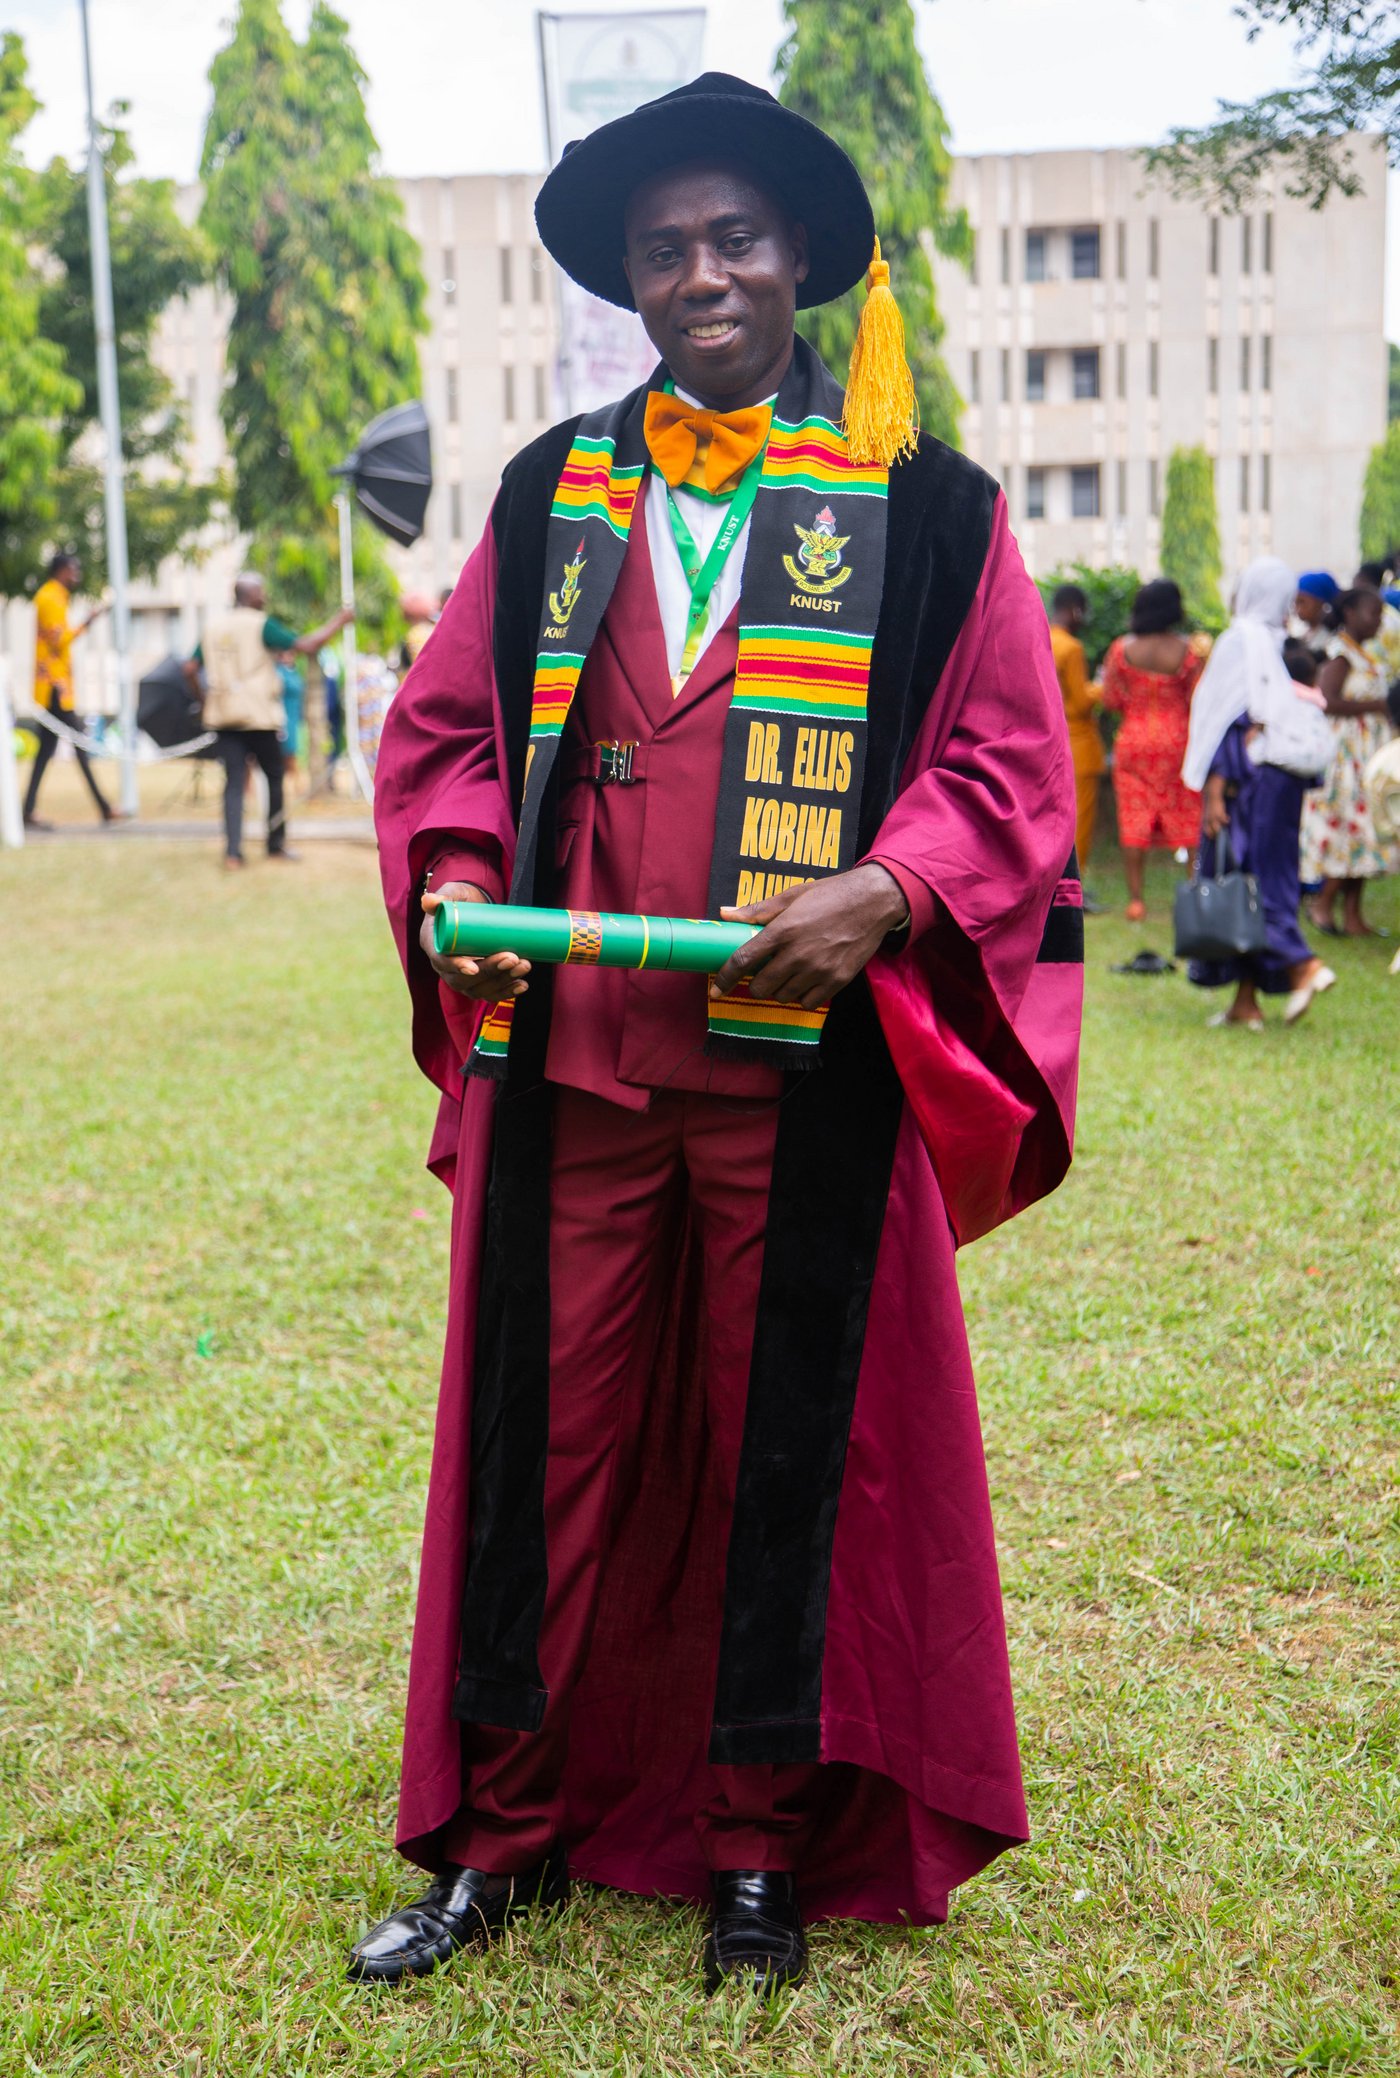 A man in a graduation robe and hat standing in the grass.